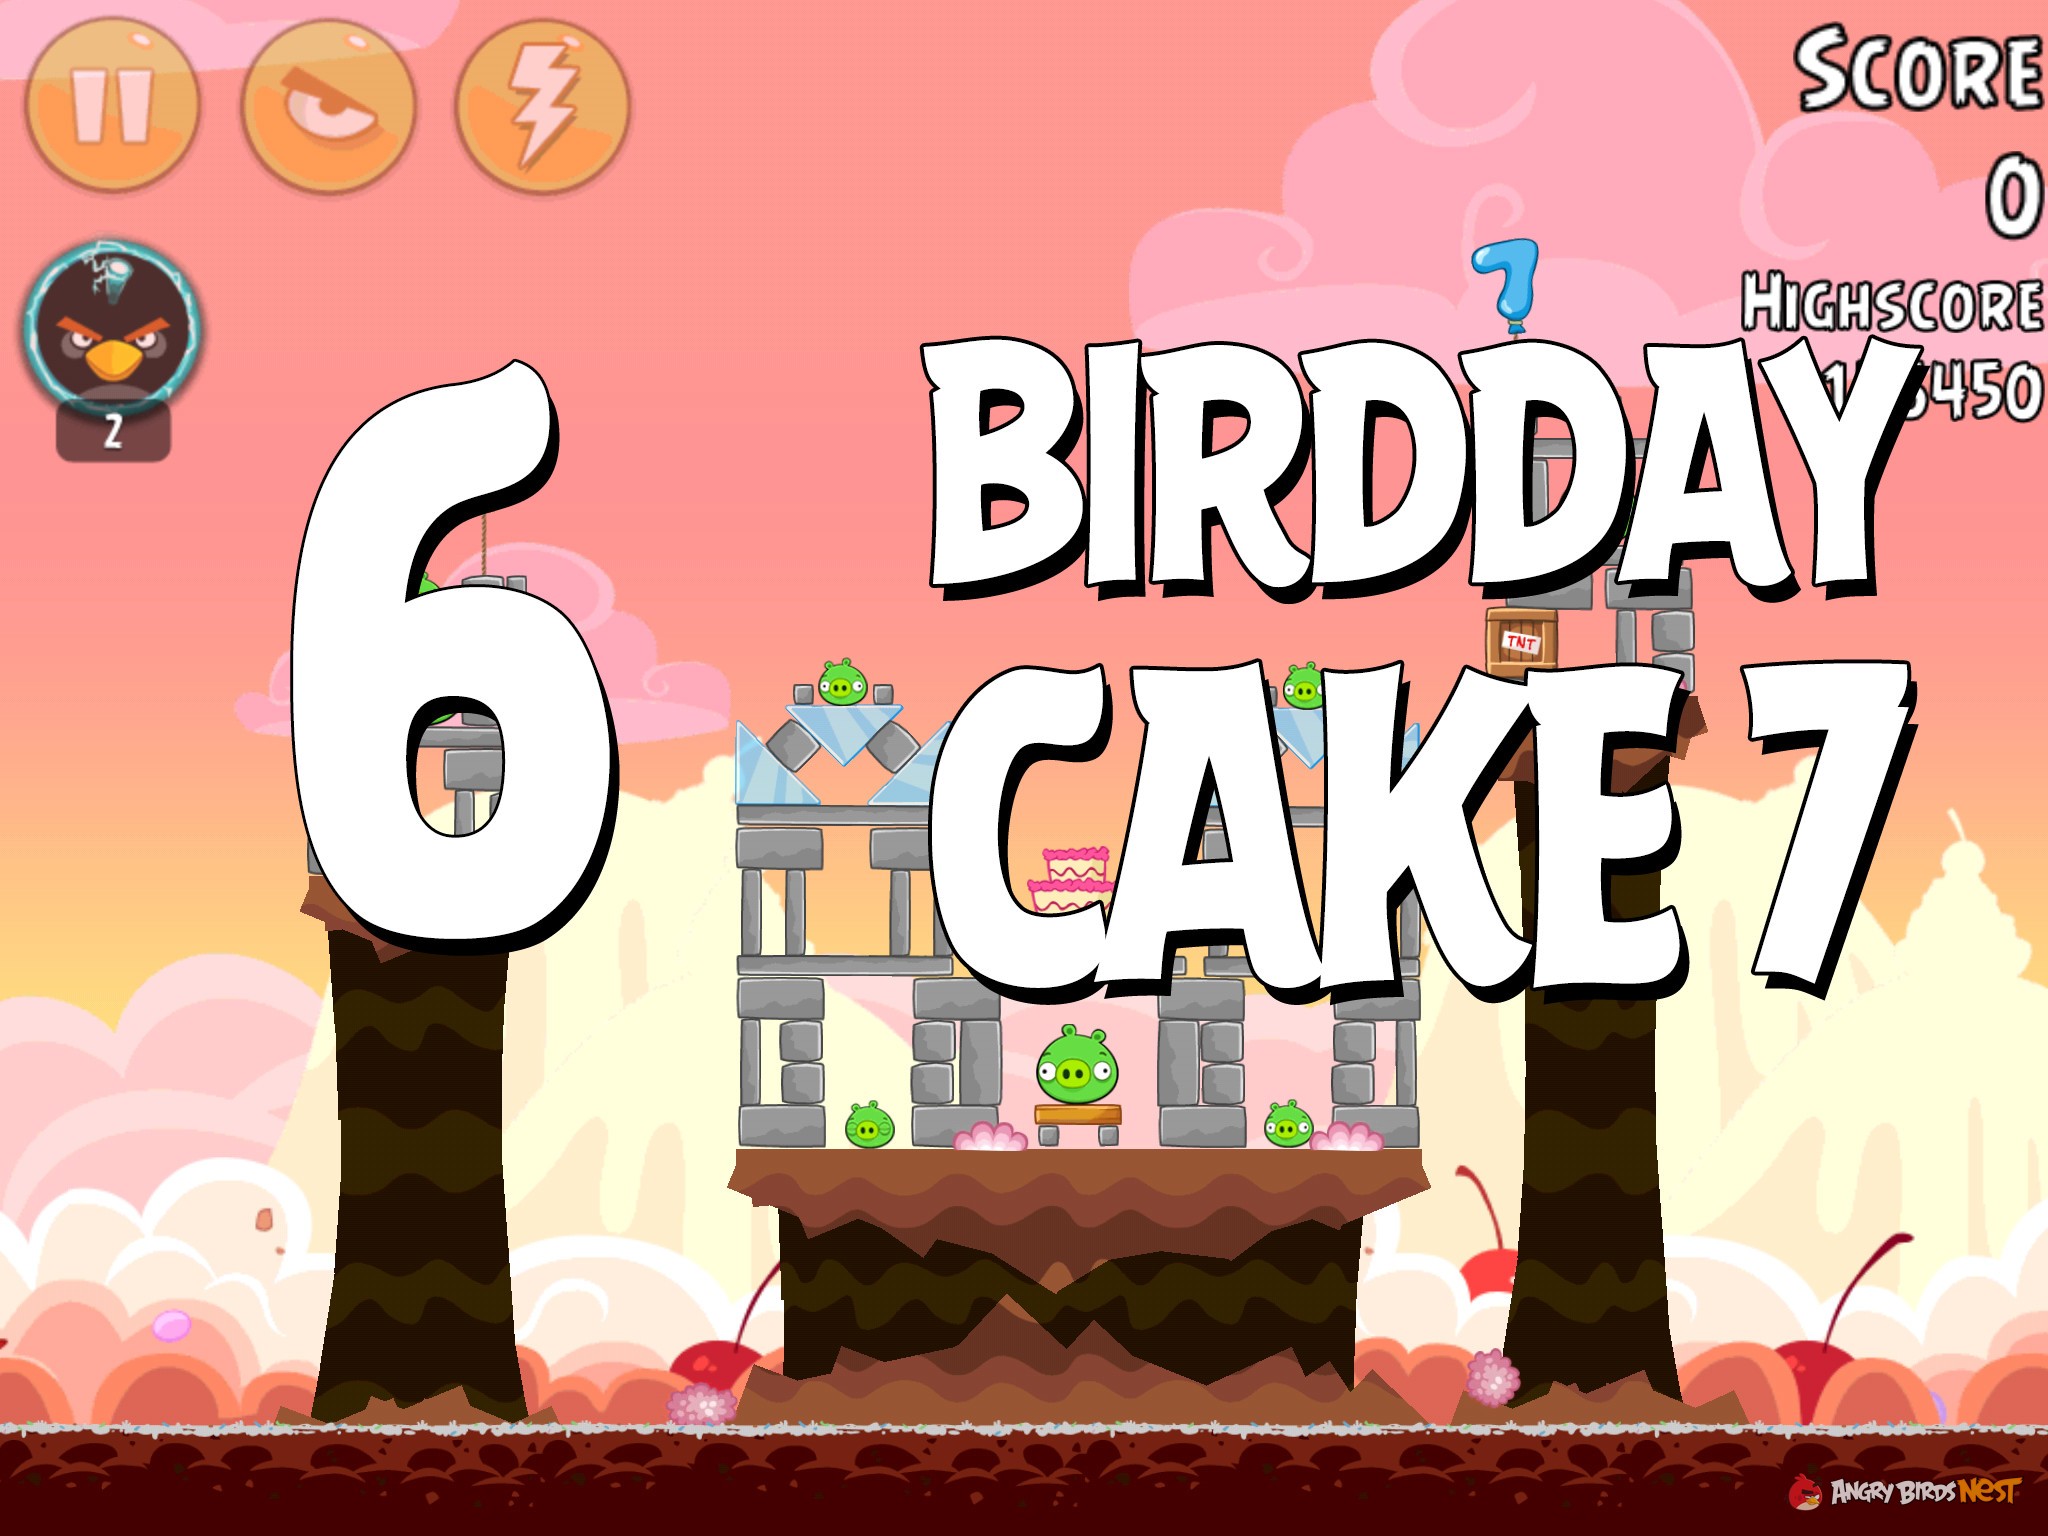 Angry-Birds-Birdday-Party-Cake-7-Level-6